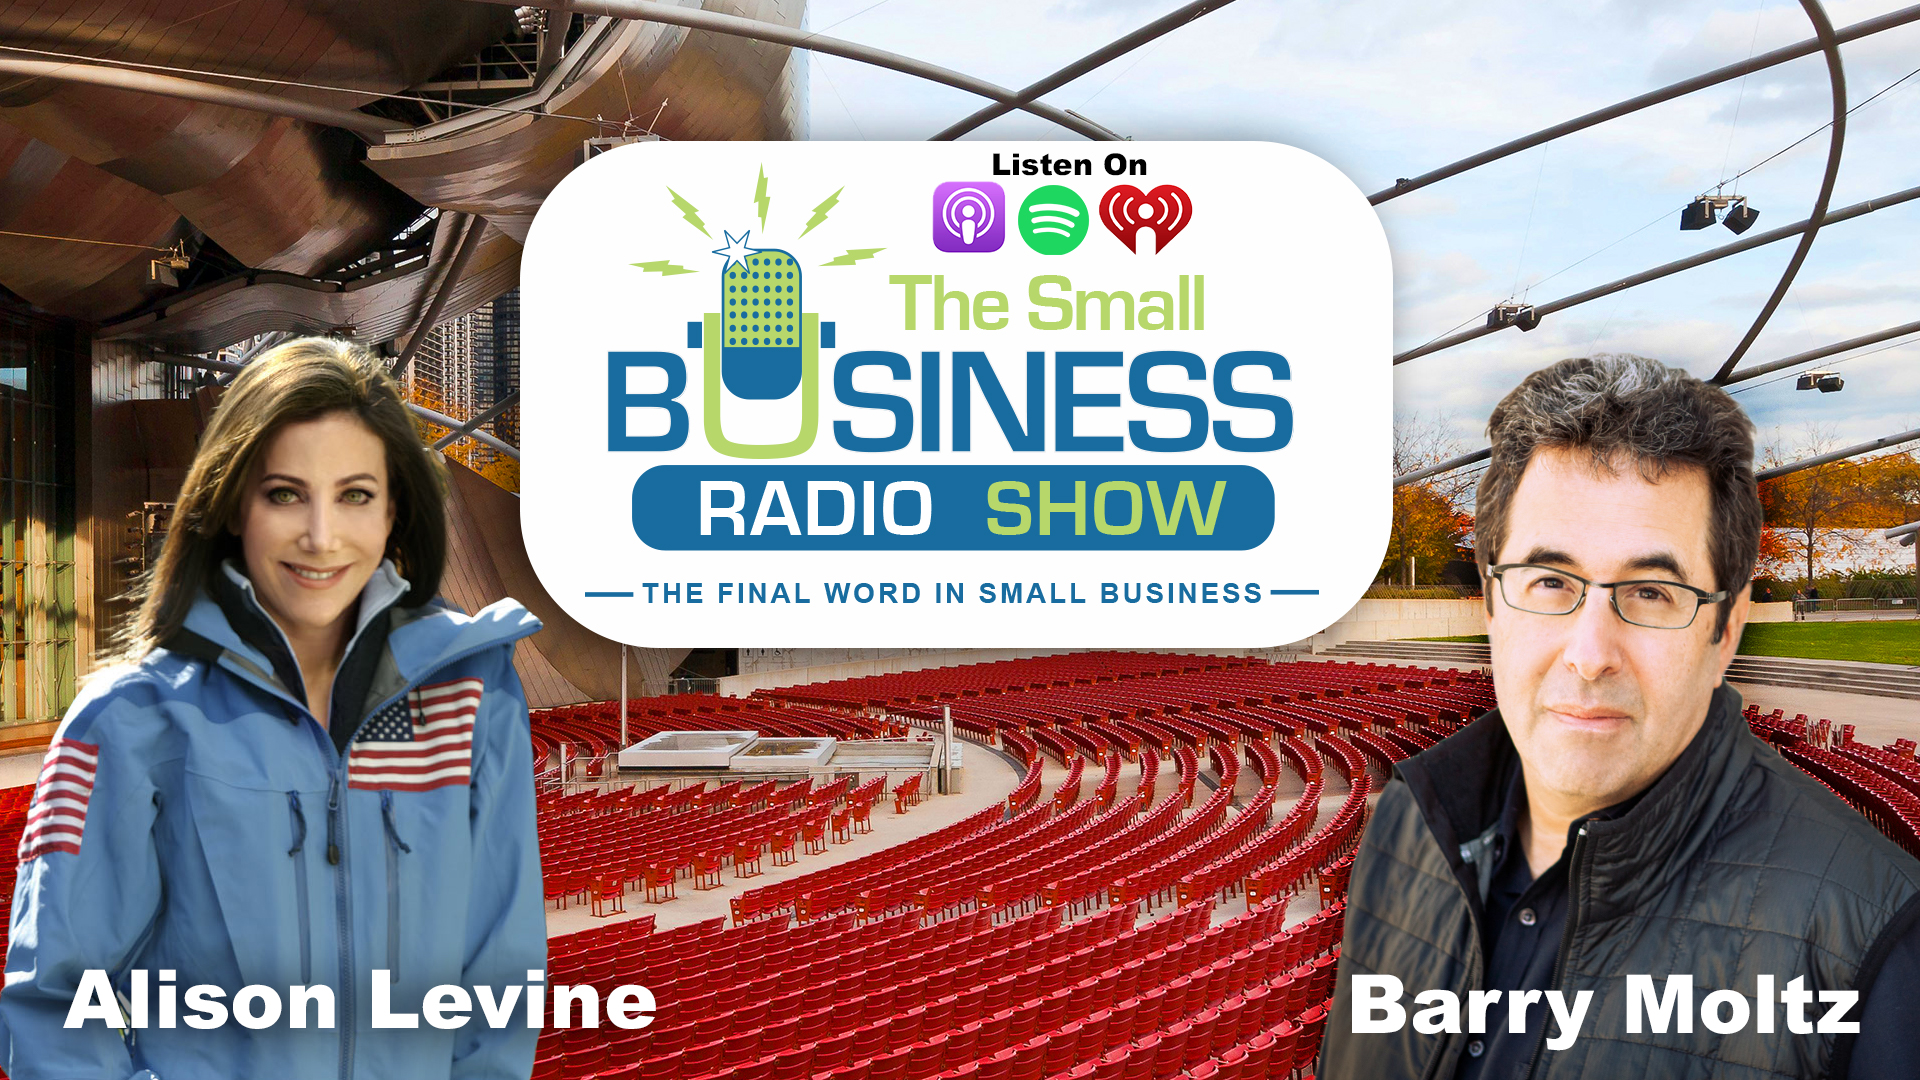 Alison Levine on The Small Business Radio Show